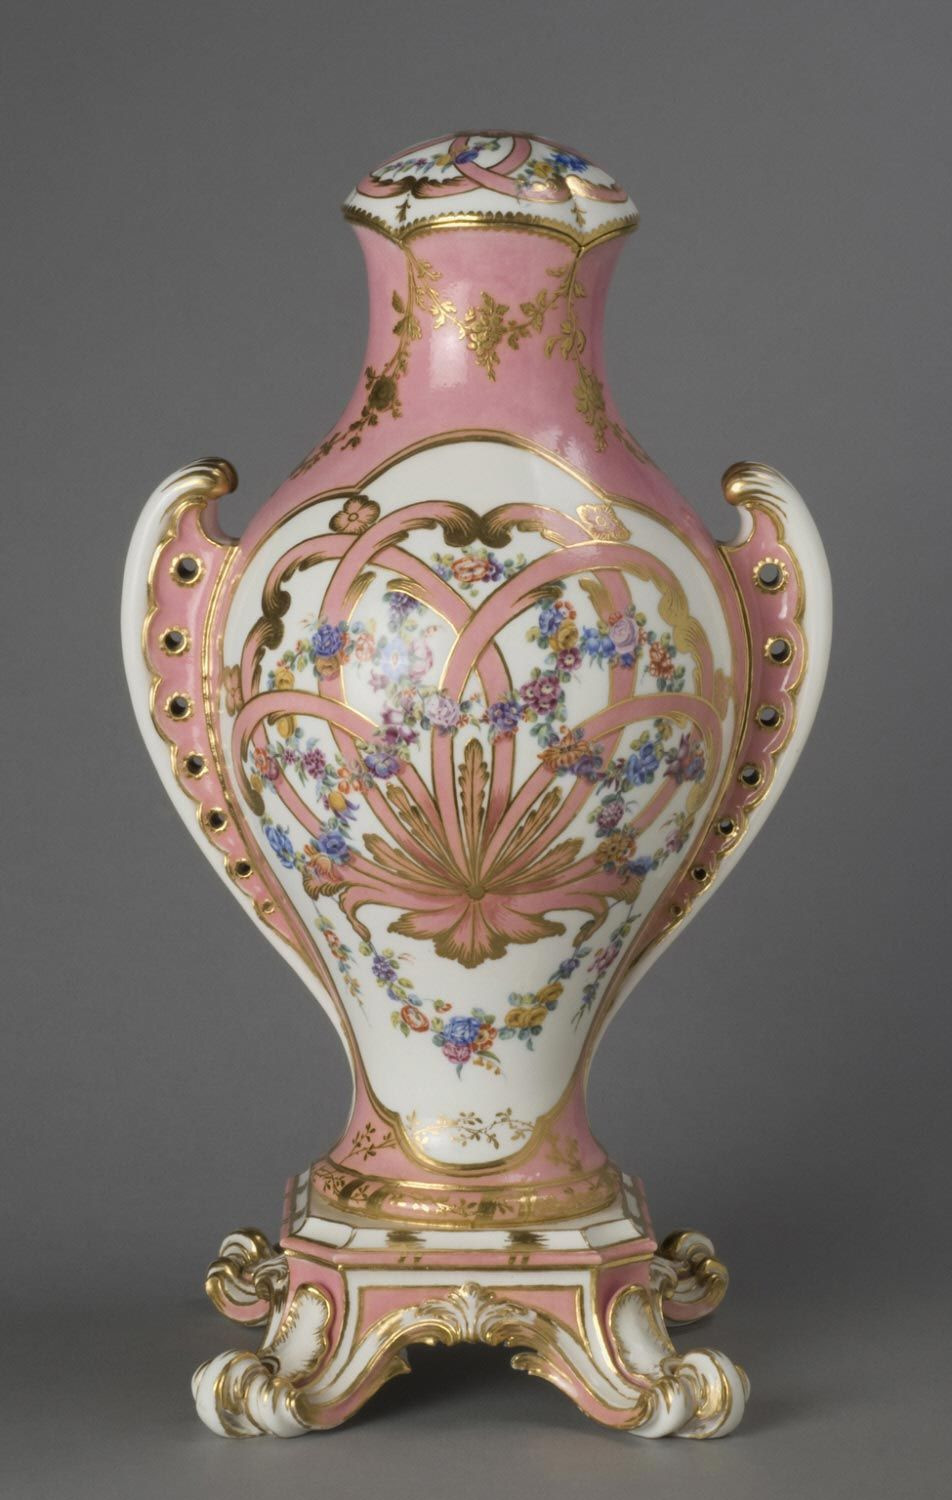 antique chinese porcelain vases of vase with lid made by the sa¨vres porcelain factory 1757 i have not inside vase with lid made by the sa¨vres porcelain factory 1757 i have not seen to many pieces that incorporated pink so strongly but the makers of this piece did